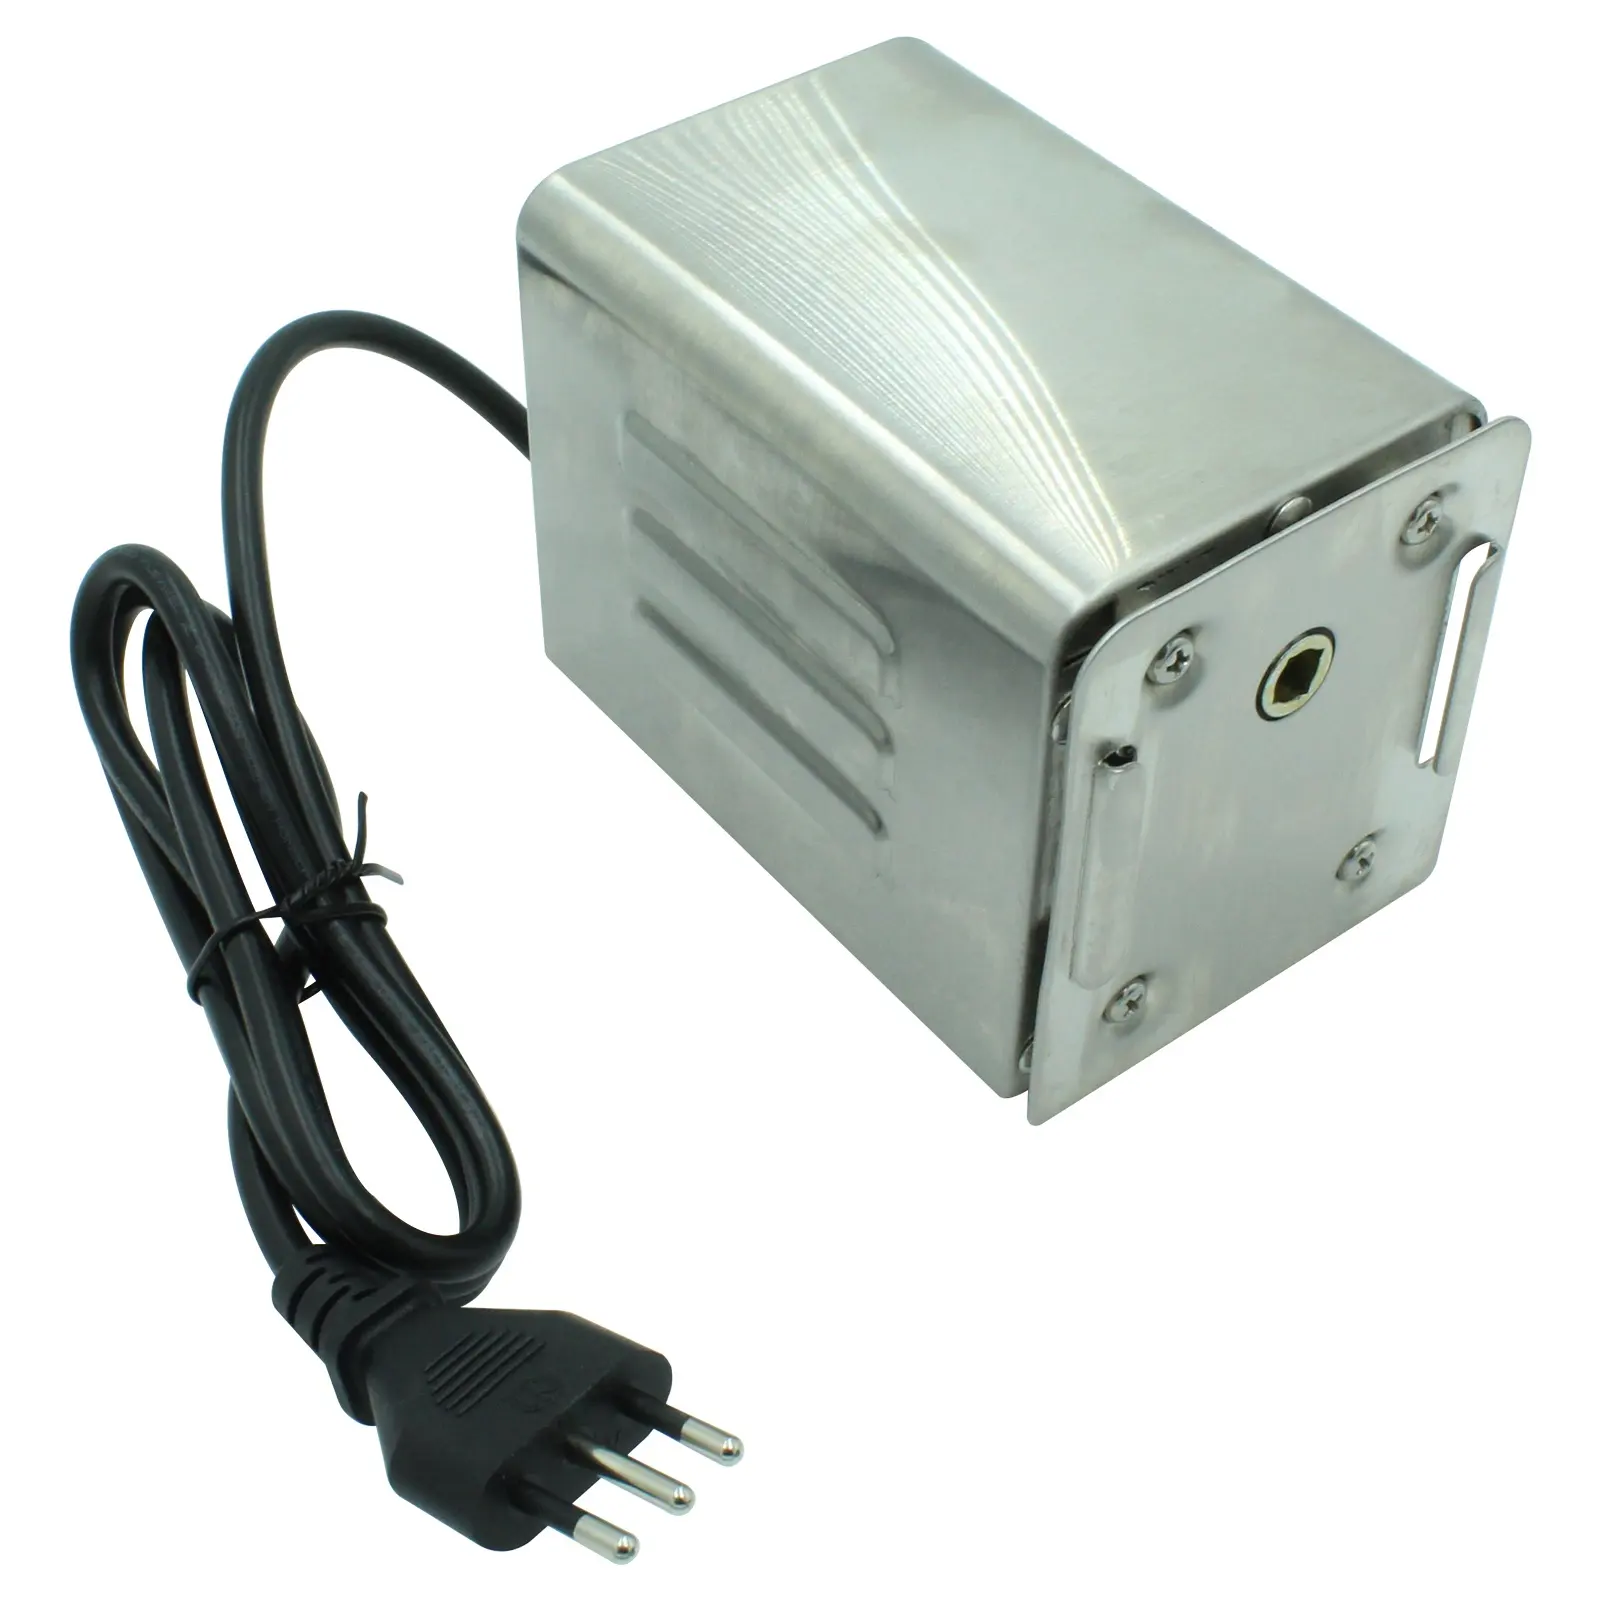 Stainless Steel BBQ Rotisserie Motor 240 V Electric Motor For BBQ Grill Parts Replace